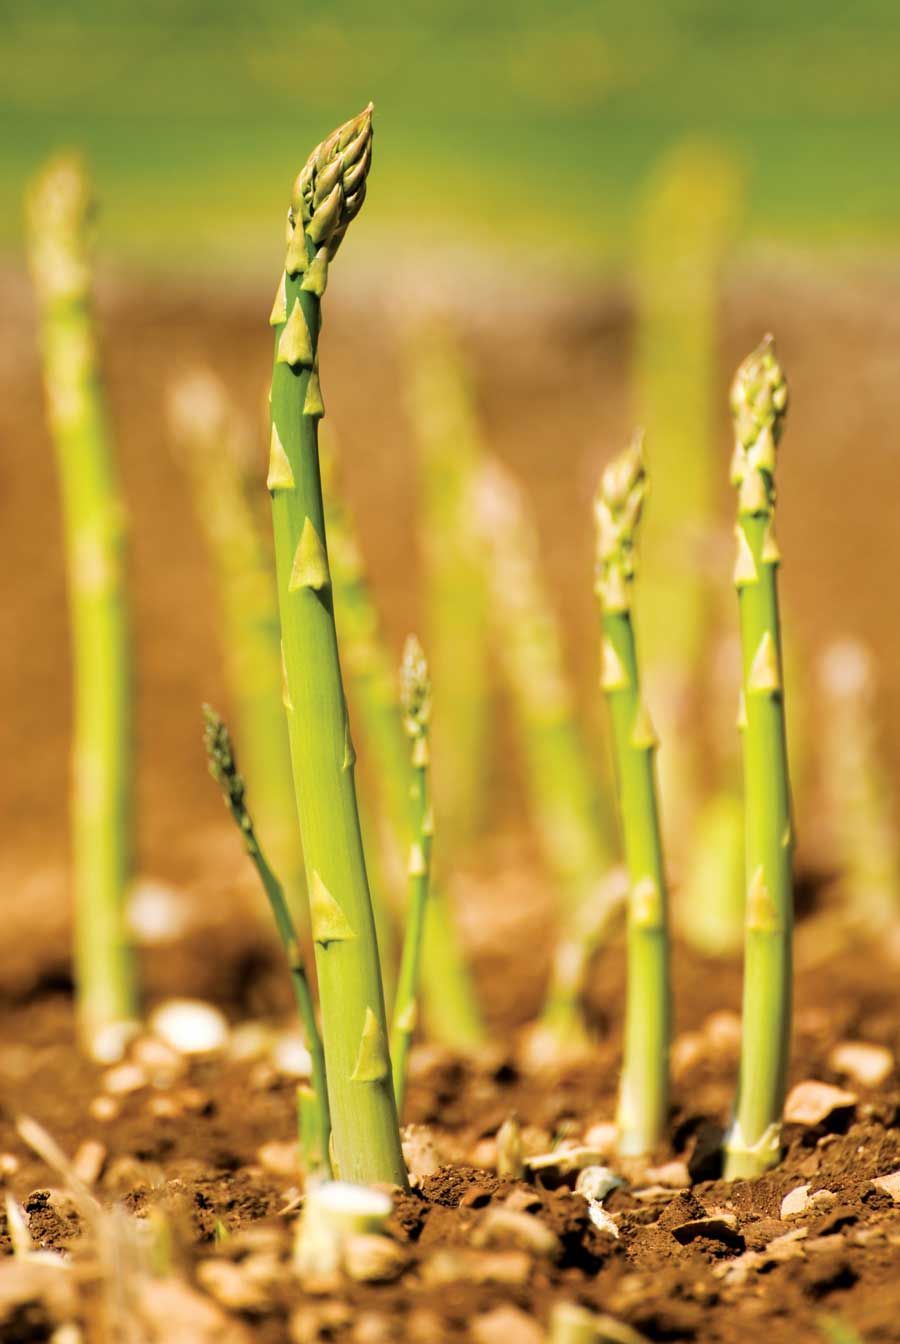 Establish an asparagus bed and reap rewards for years….mmm my fave